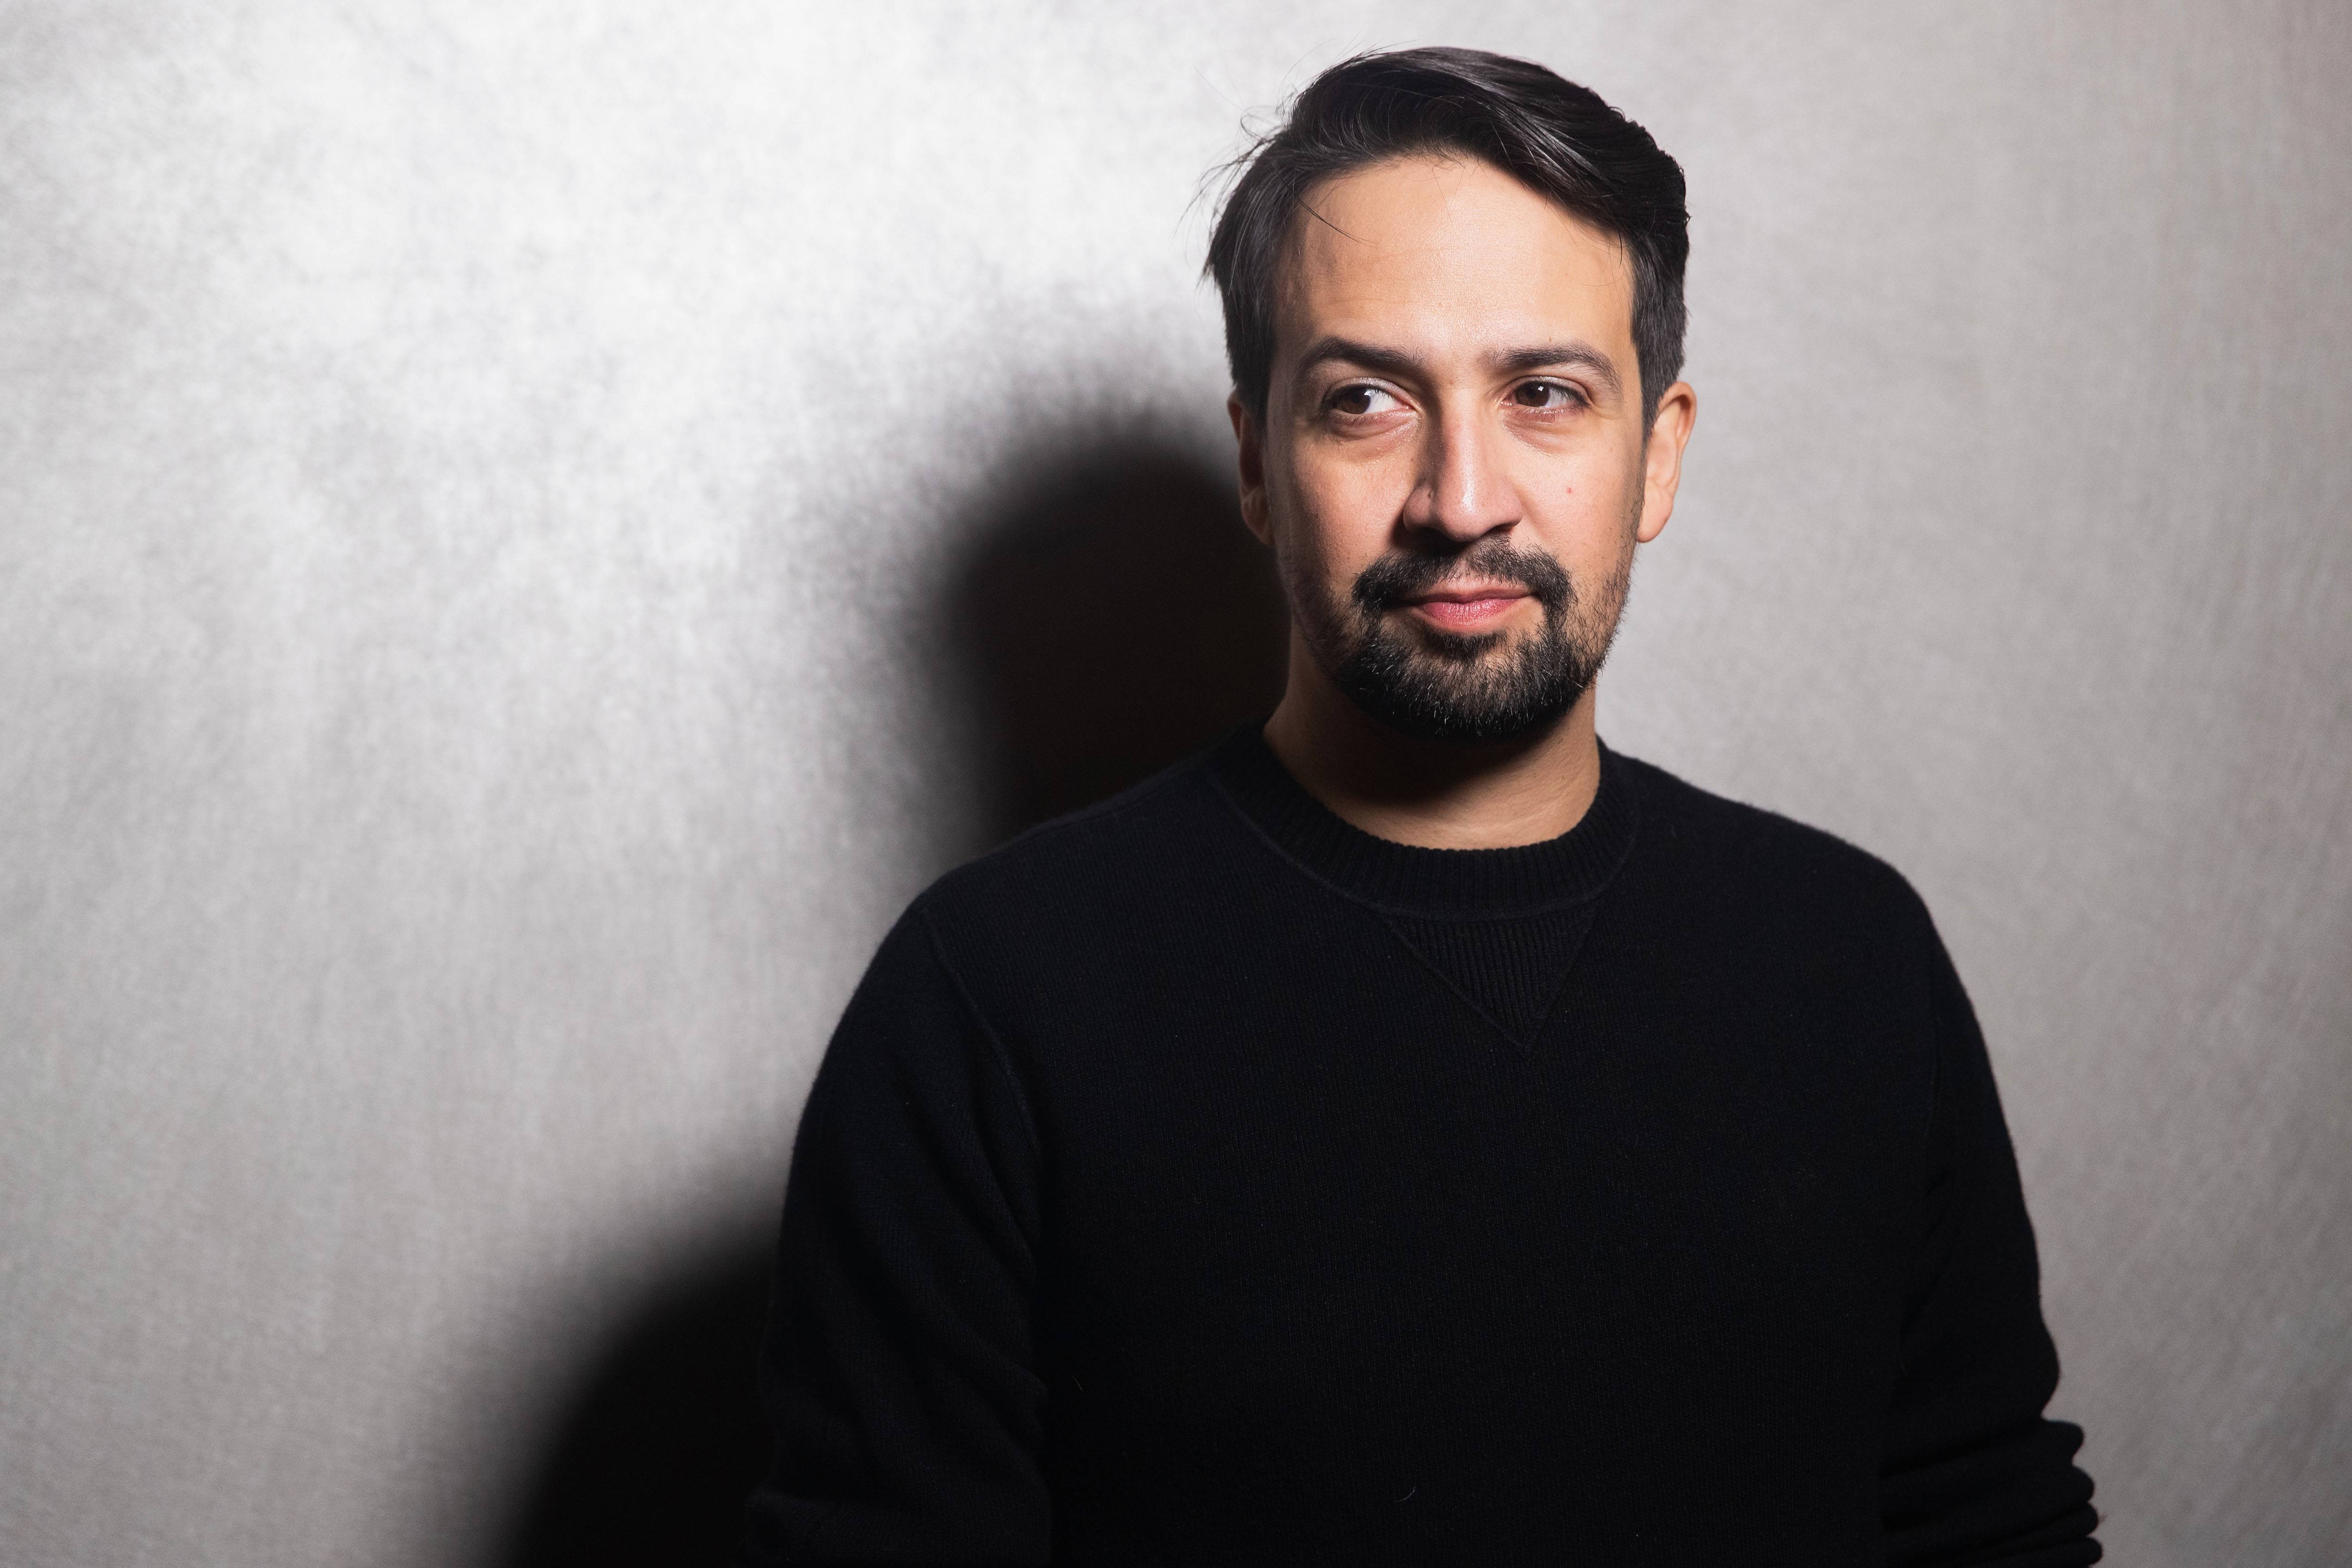 PARK CITY, UT - JANUARY 25:  Lin-Manuel Miranda attends the official after party for "Siempre, Luis" at The Latinx House on January 25, 2020 in Park City, Utah.  (Photo by Mat Hayward/Getty Images for The Latinx House)